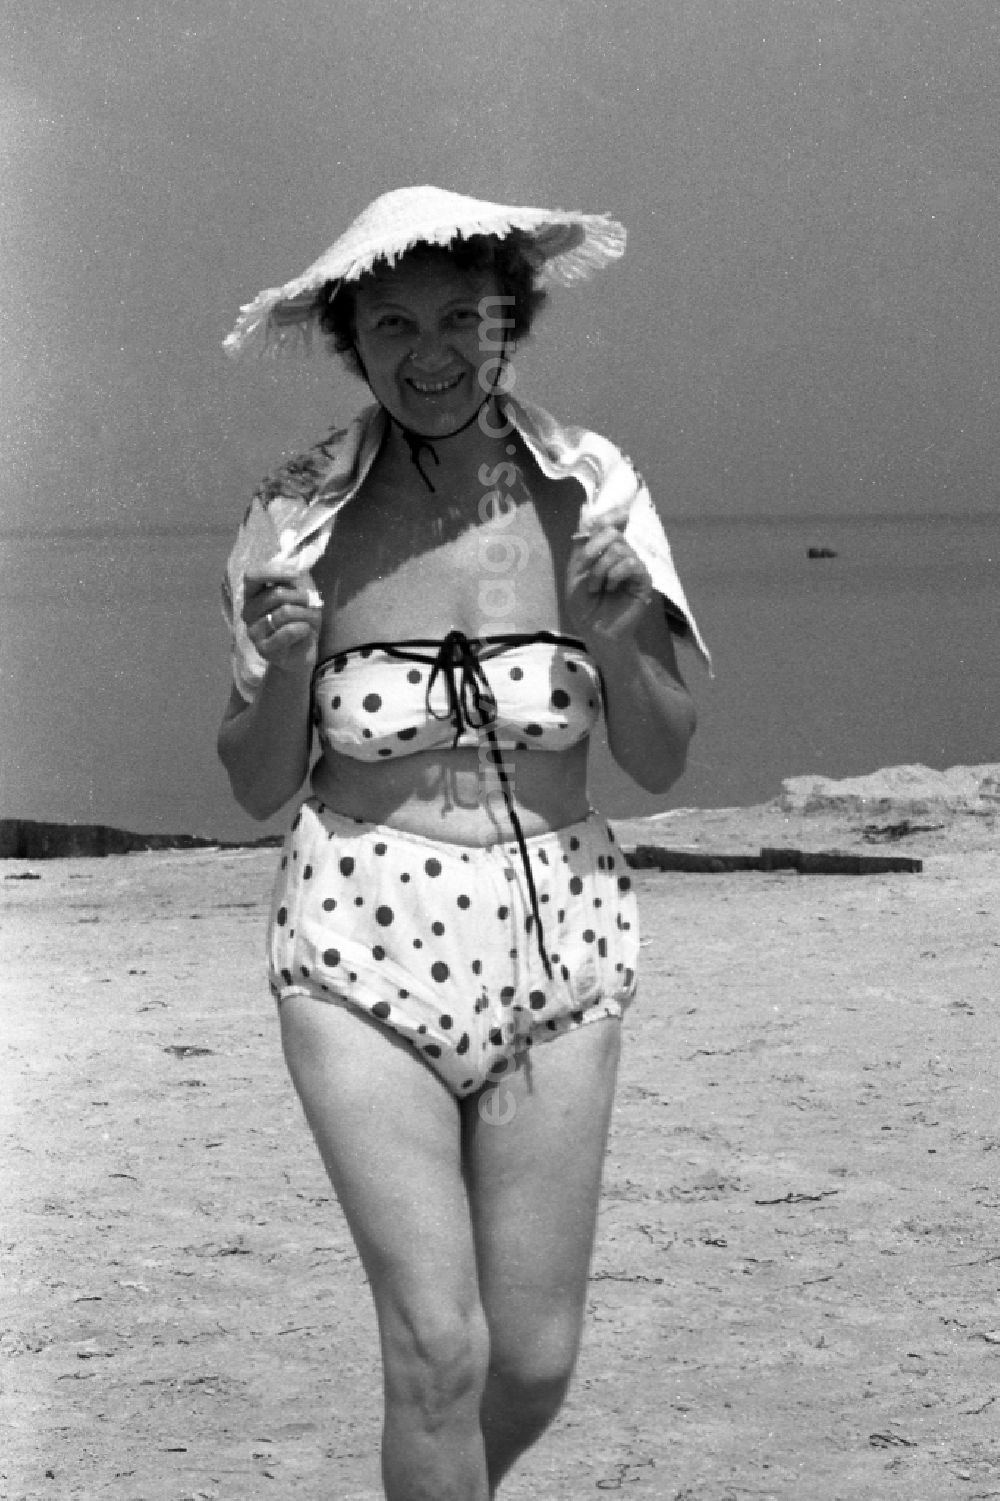 GDR image archive: Heringsdorf - A woman with straw hat and in the bikini on the beach of the Baltic Sea in herring village in the federal state Mecklenburg-West Pomerania in the area of the former GDR, German democratic republic